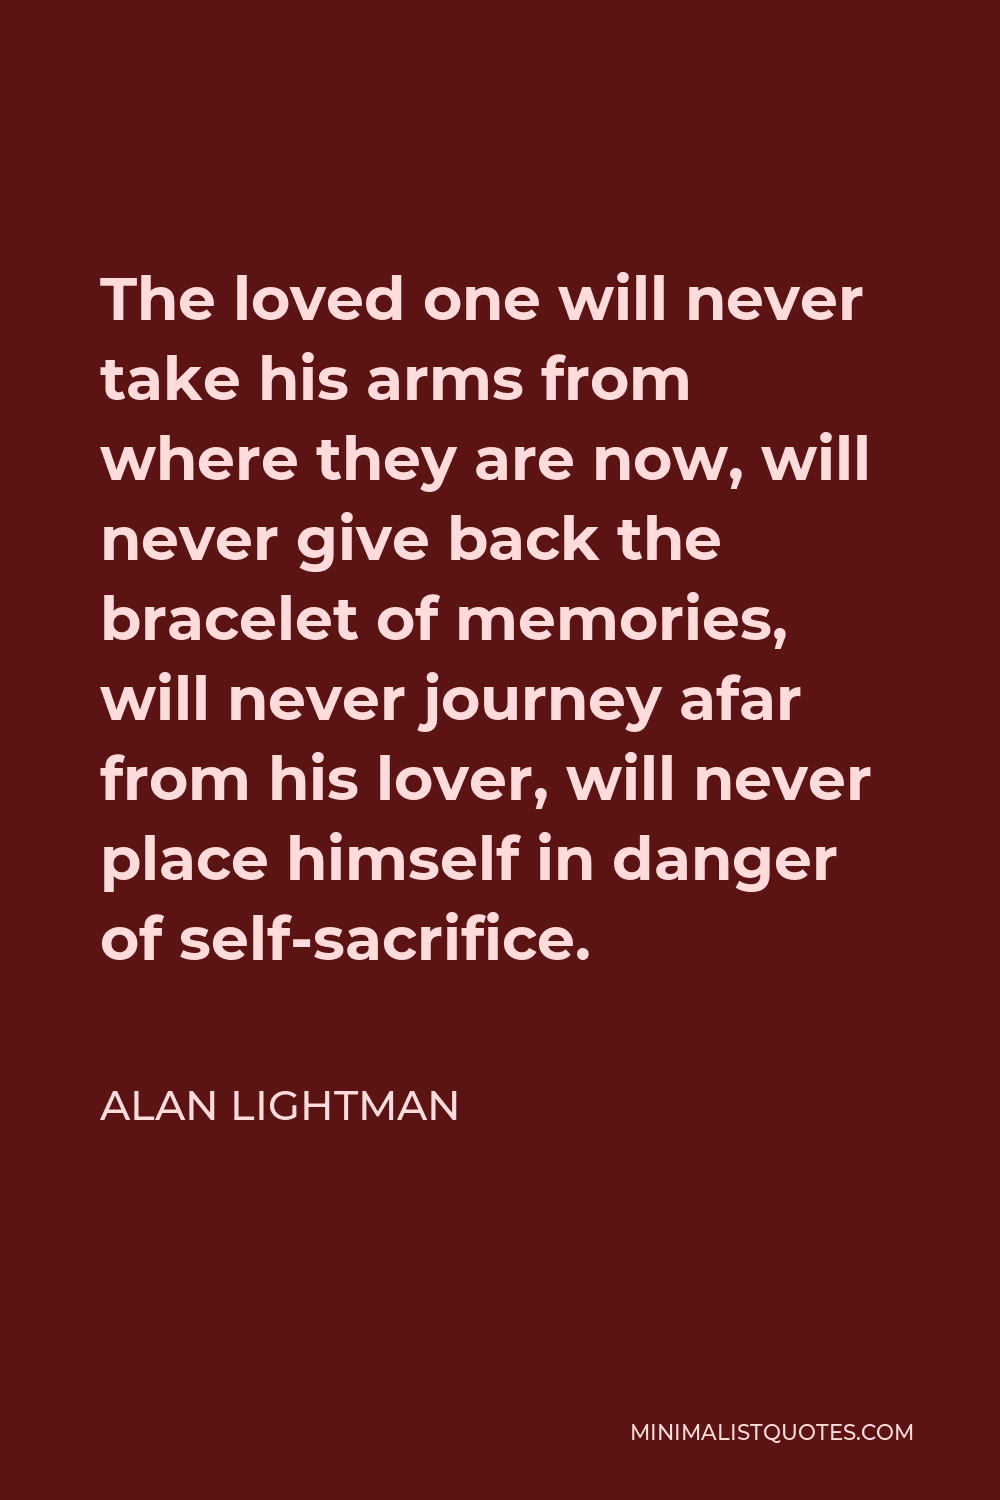 Alan Lightman Quote - The loved one will never take his arms from where they are now, will never give back the bracelet of memories, will never journey afar from his lover, will never place himself in danger of self-sacrifice.